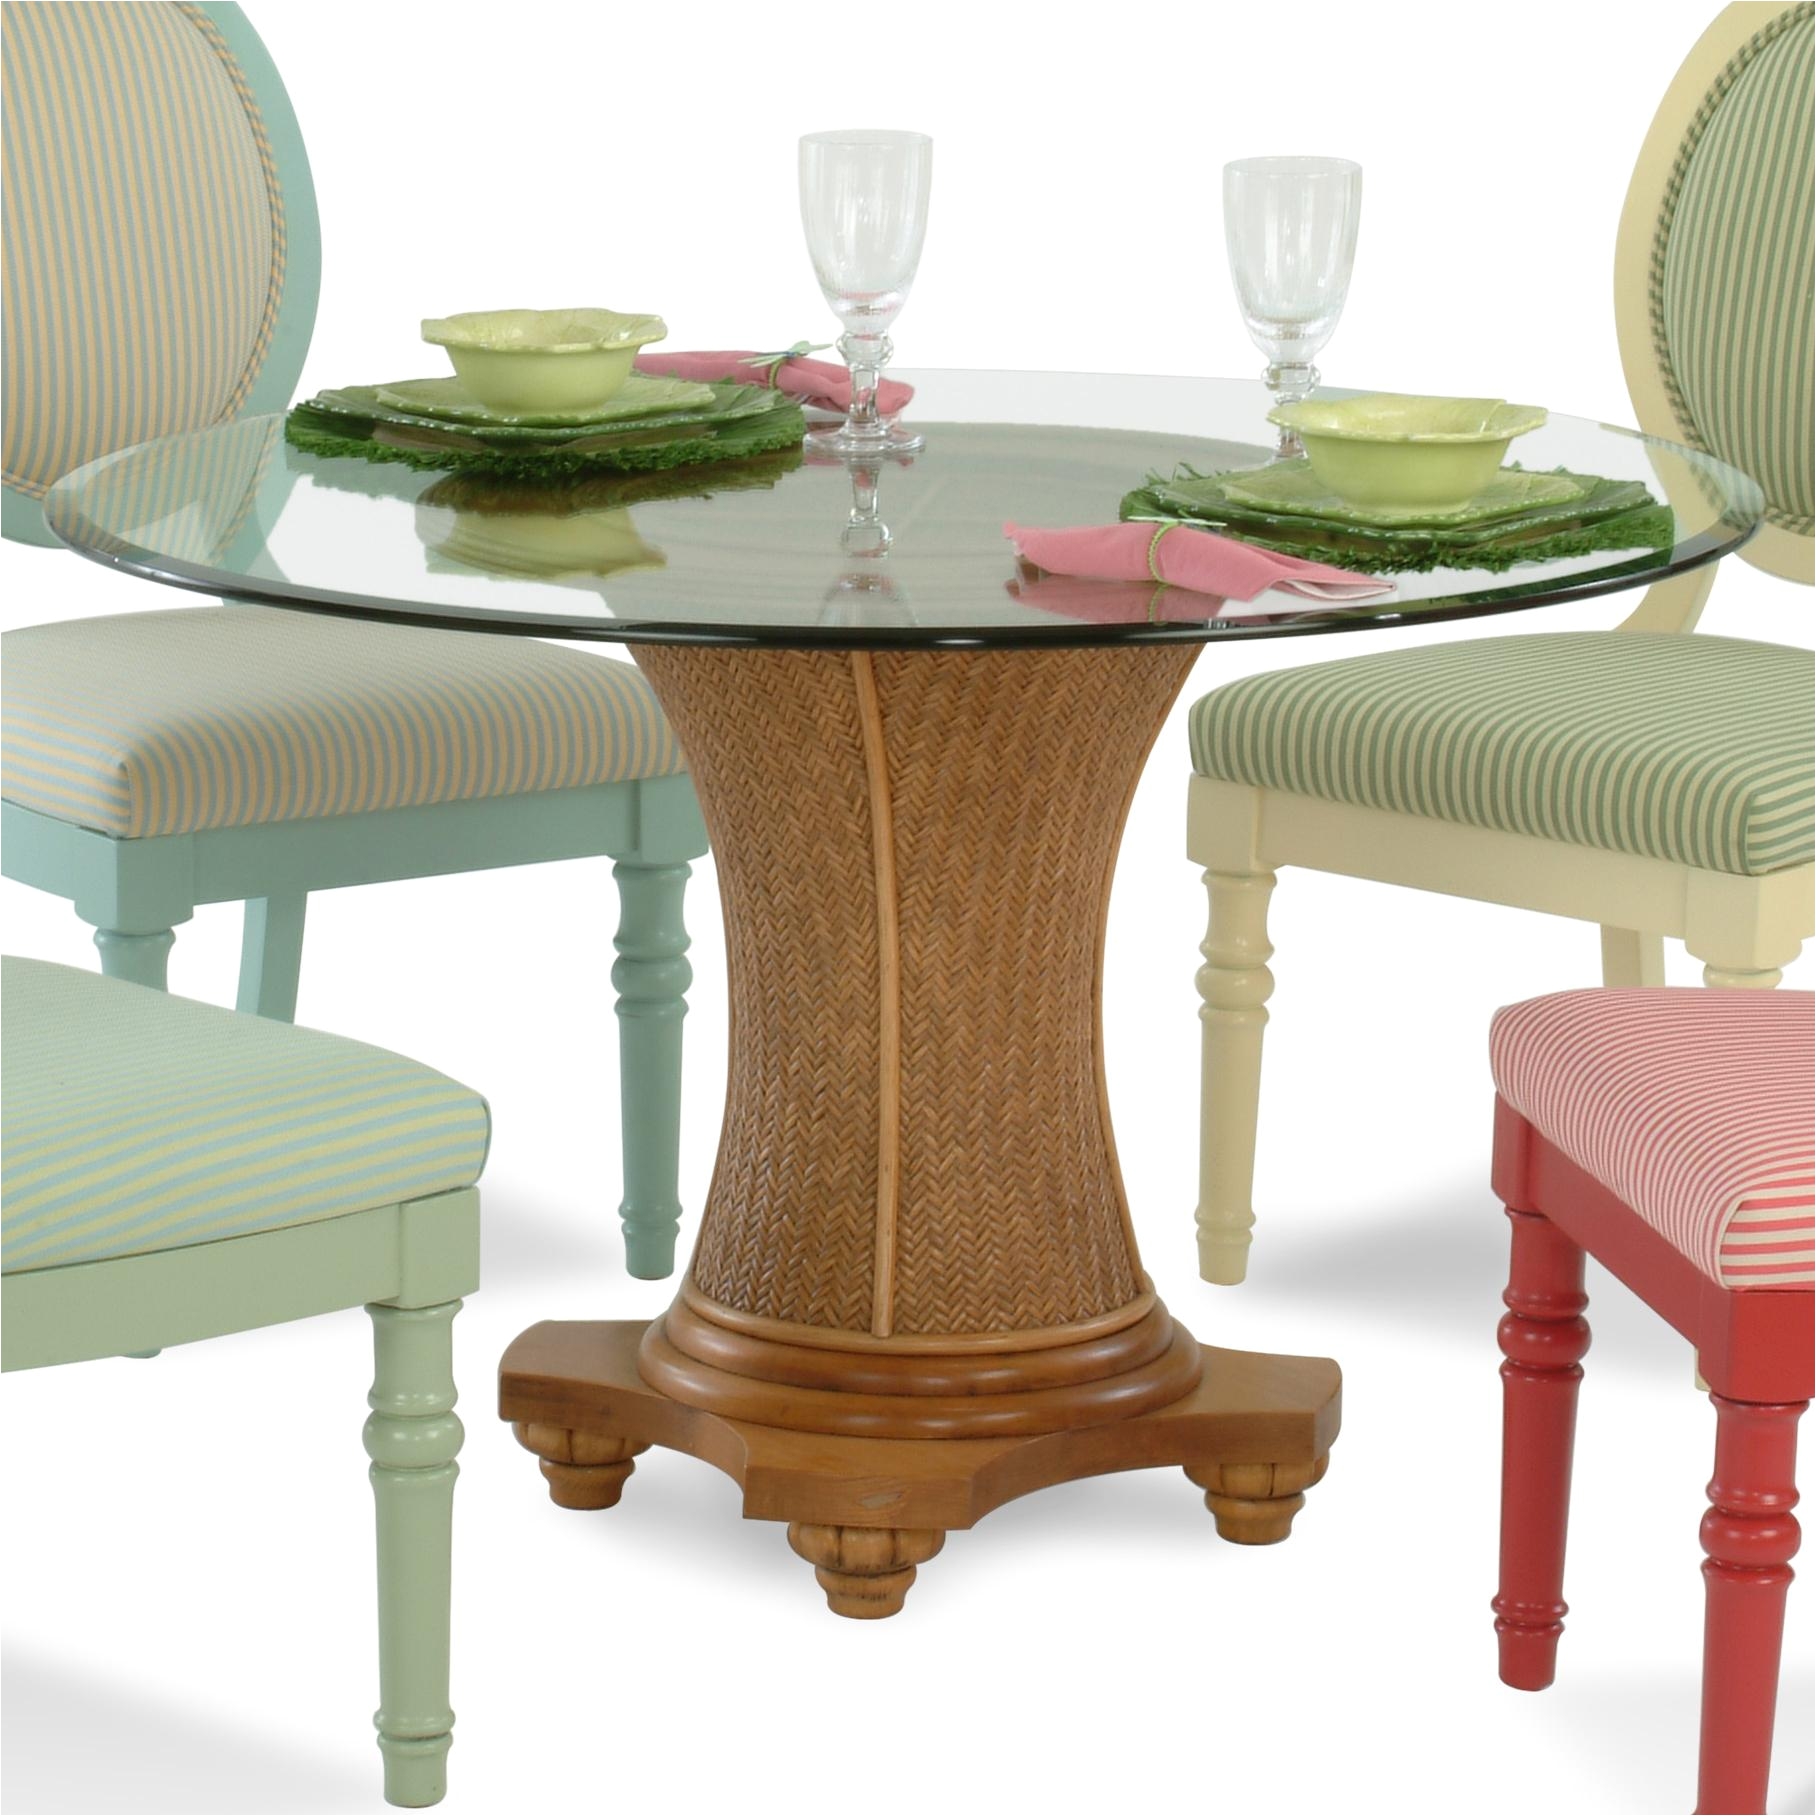 braxton culler sawgrass tropical round glass table with wicker pedestal ahfa dining room table dealer locator